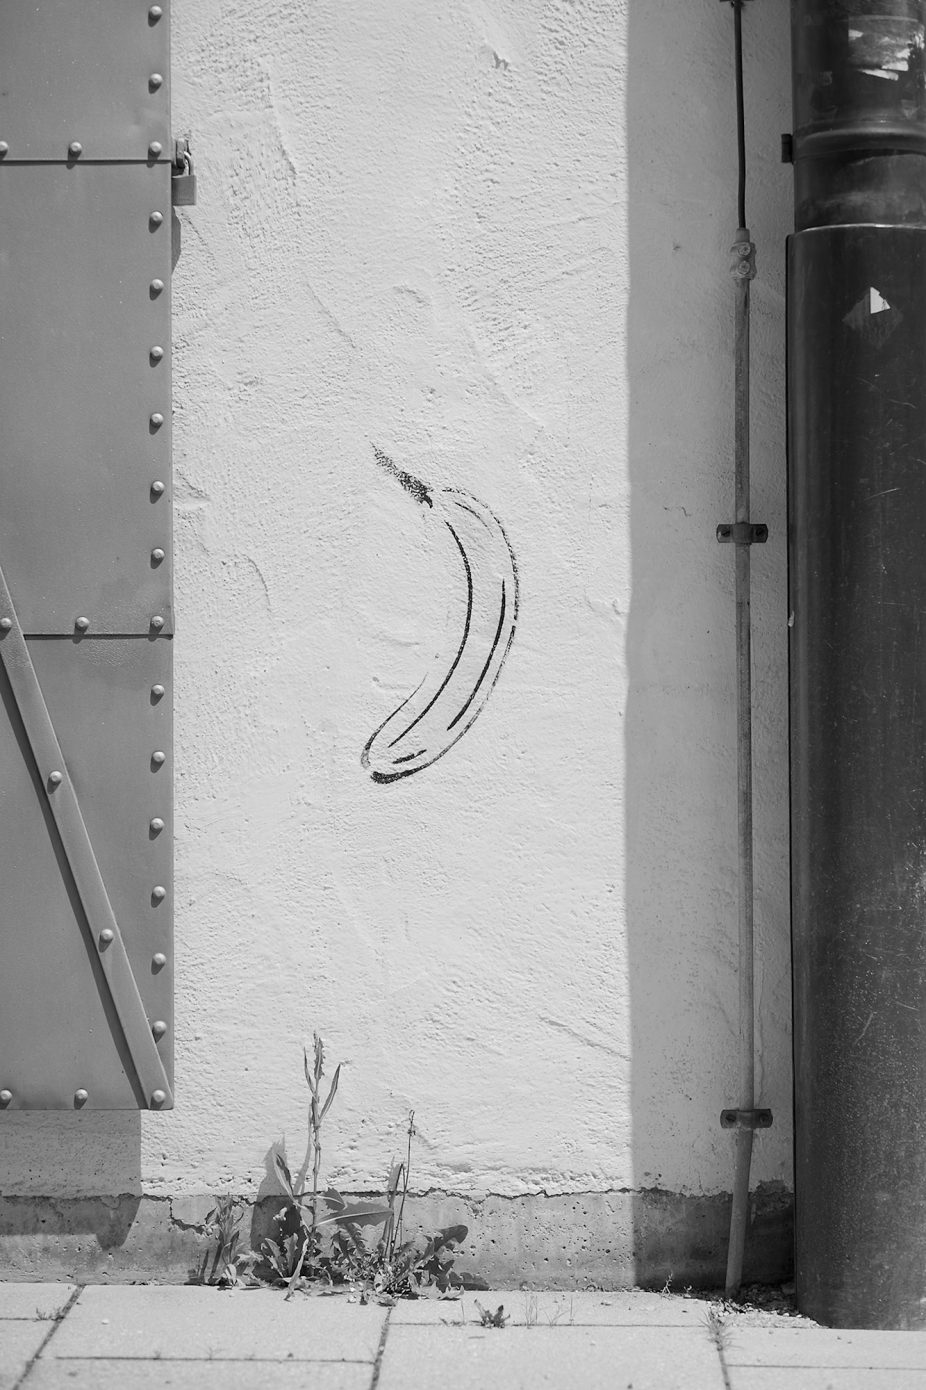 Banana without Republic. Tagged with Black & White, Graffiti, Treatment, Urban, Weese Weeds